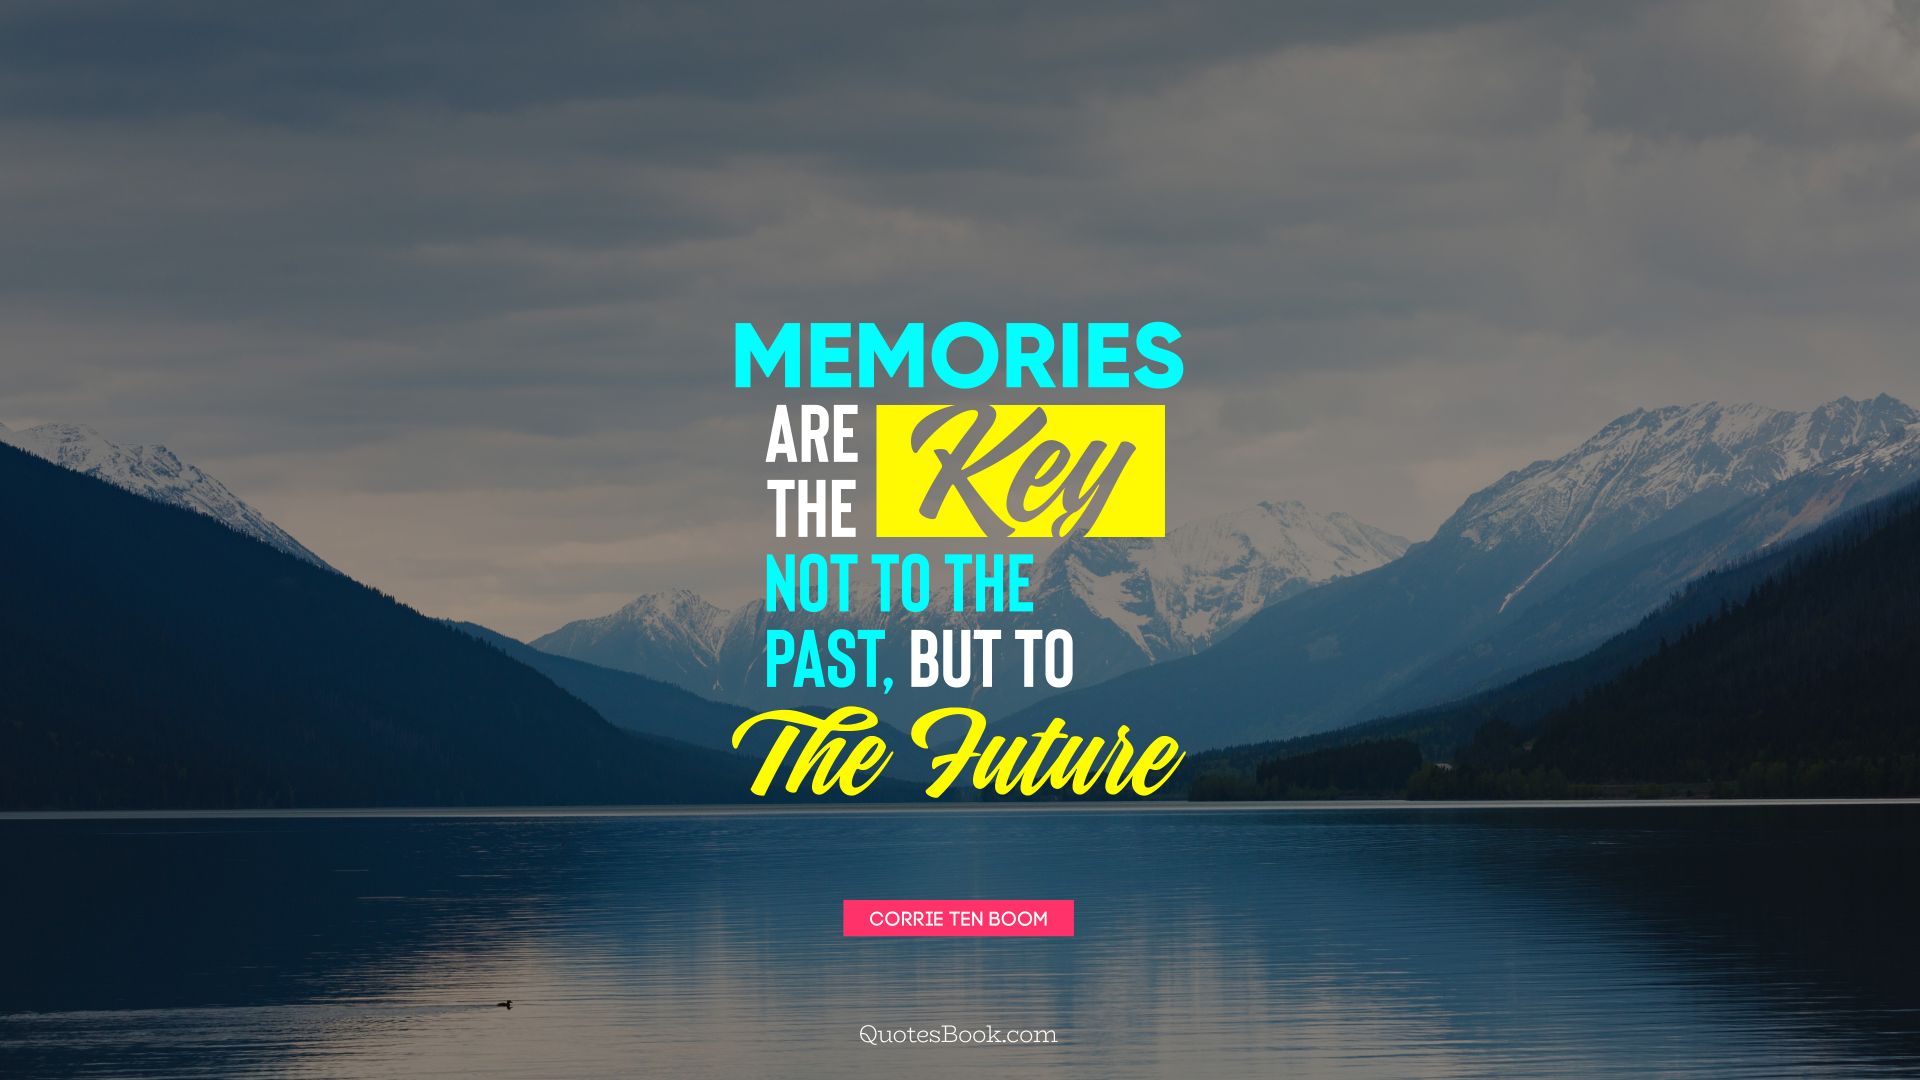 Memories are the key not to the past, but to the future. - Quote by Corrie Ten Boom